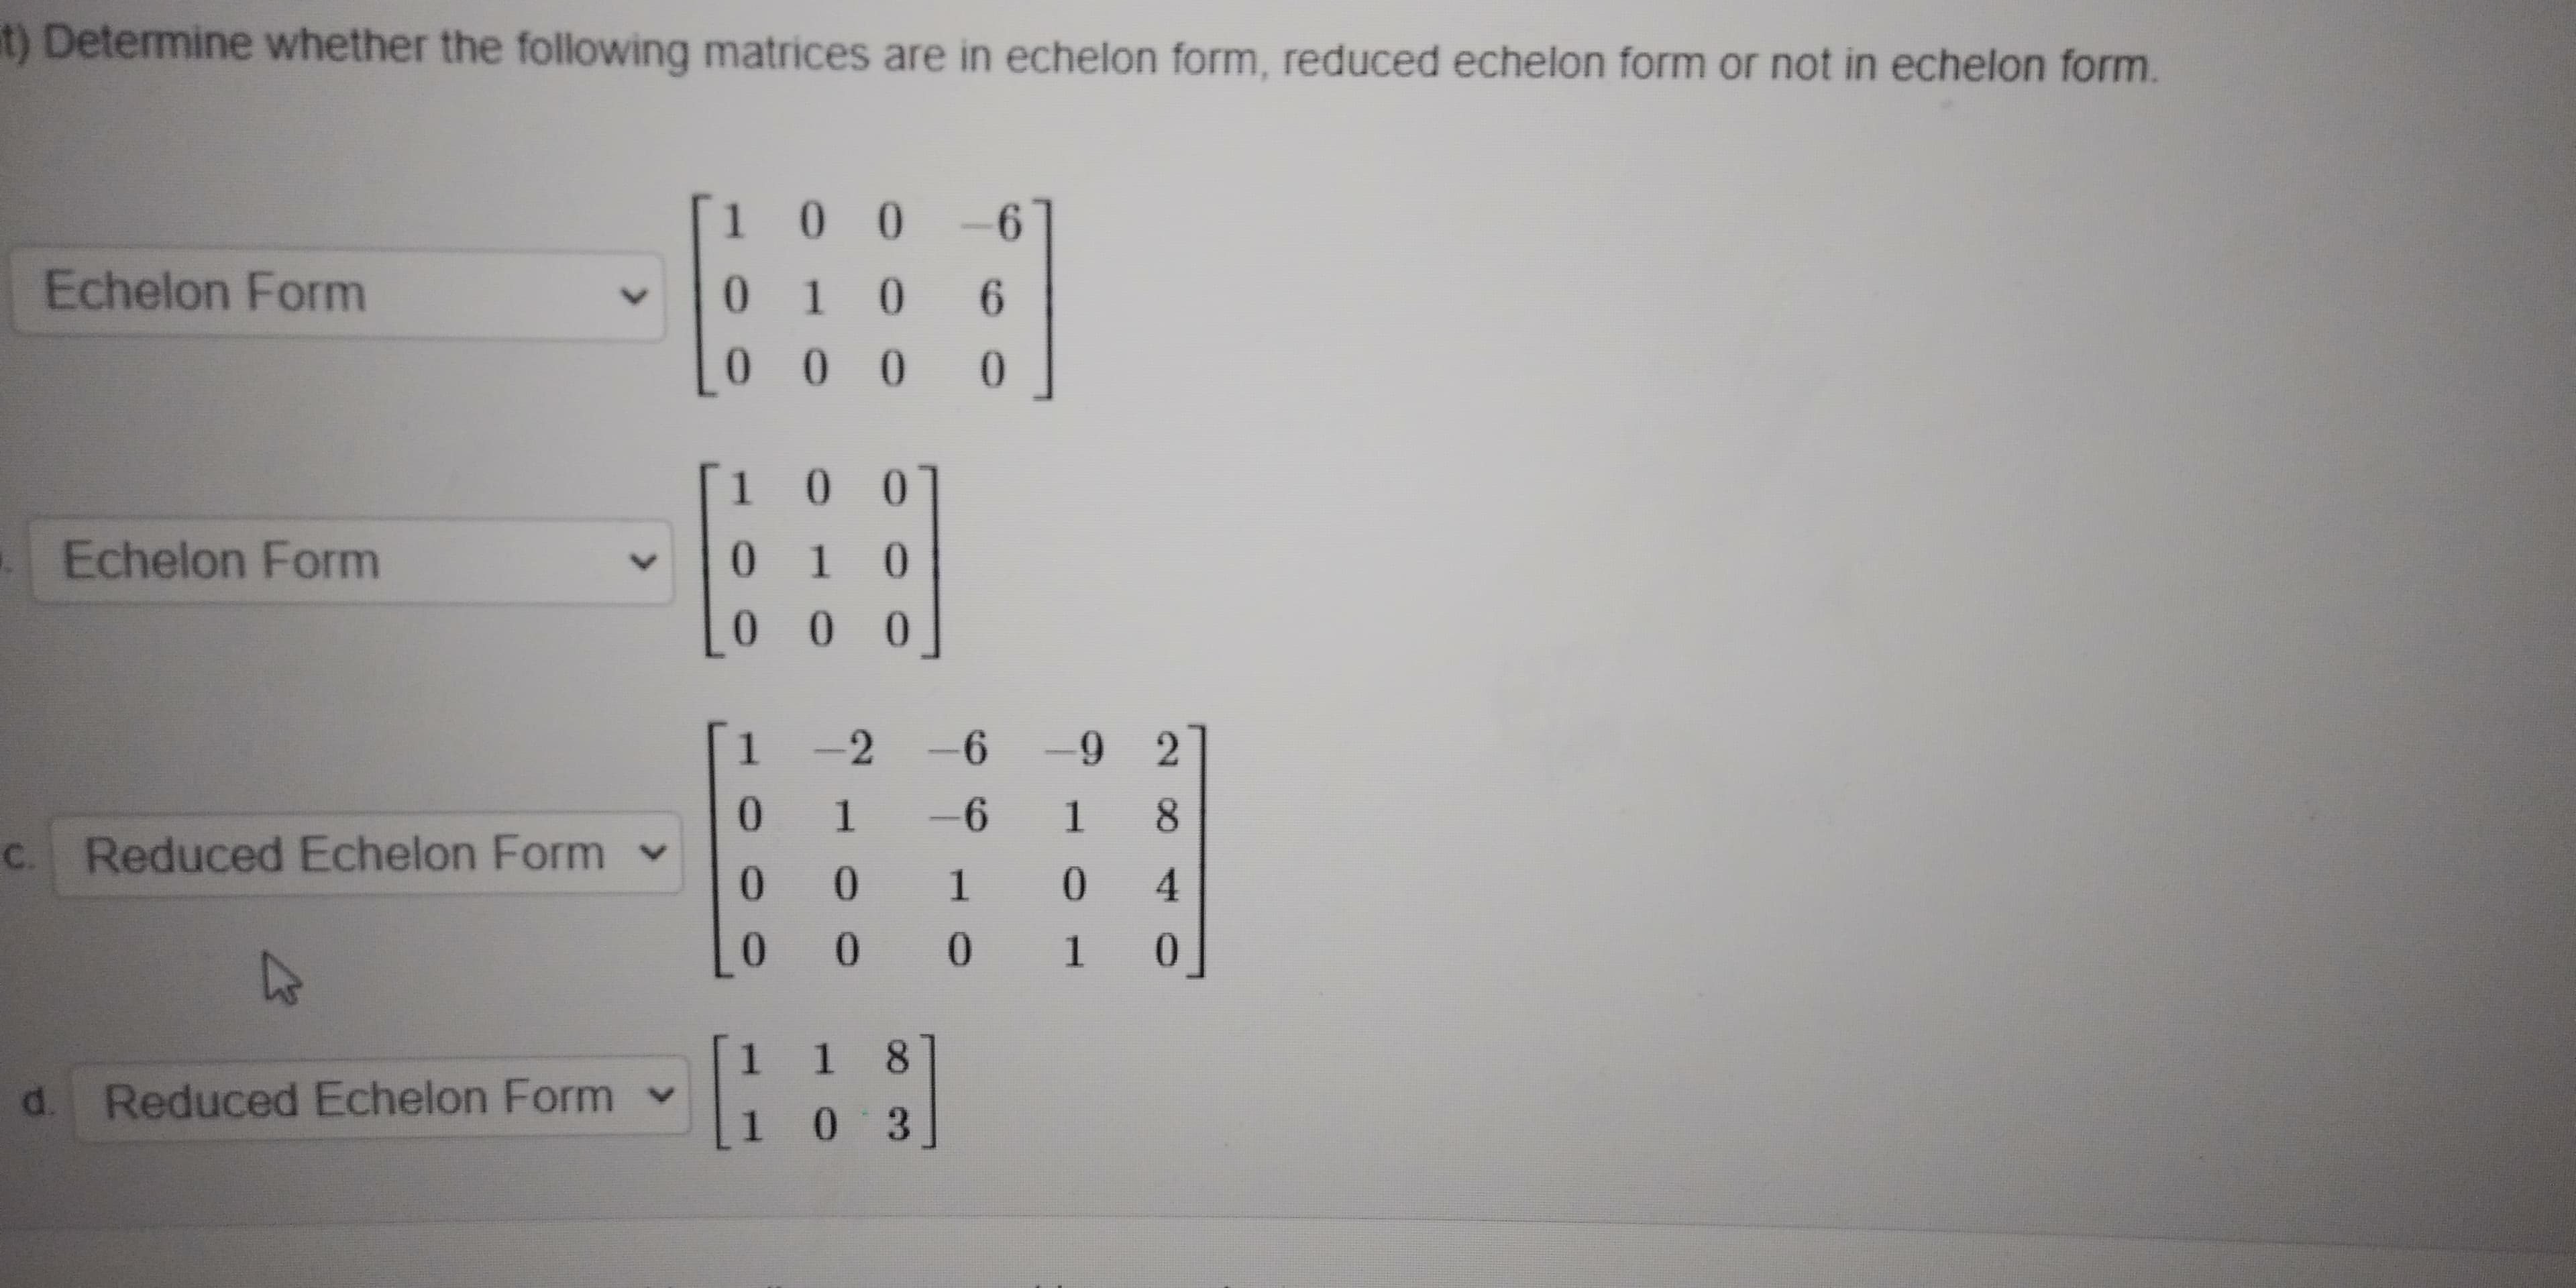 d.
Reduced Echelon Form v
1 1 8
* 1 0
0.
0.
C.
Reduced Echelon Form v
-6 18
-2
1-2
0
0 0
*
Echelon Form
10 0
0
10 0
9.
9- 00
Echelon Form
t) Determine whether the following matrices are in echelon form, reduced echelon form or not in echelon form.
